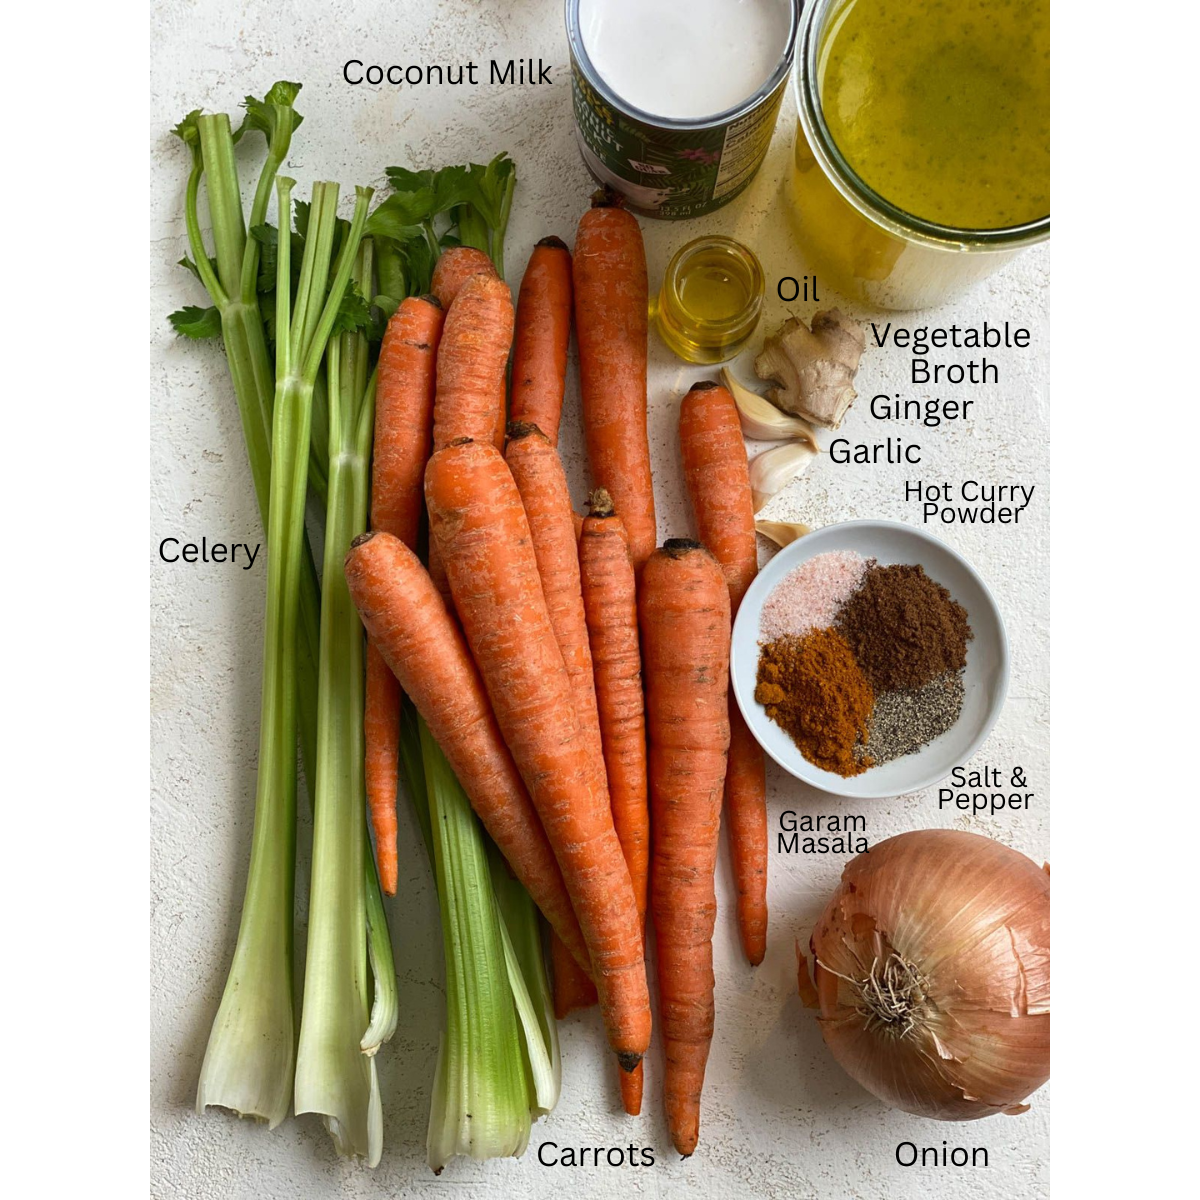 ingredients for Spicy Carrot Soup measured out against a white surface